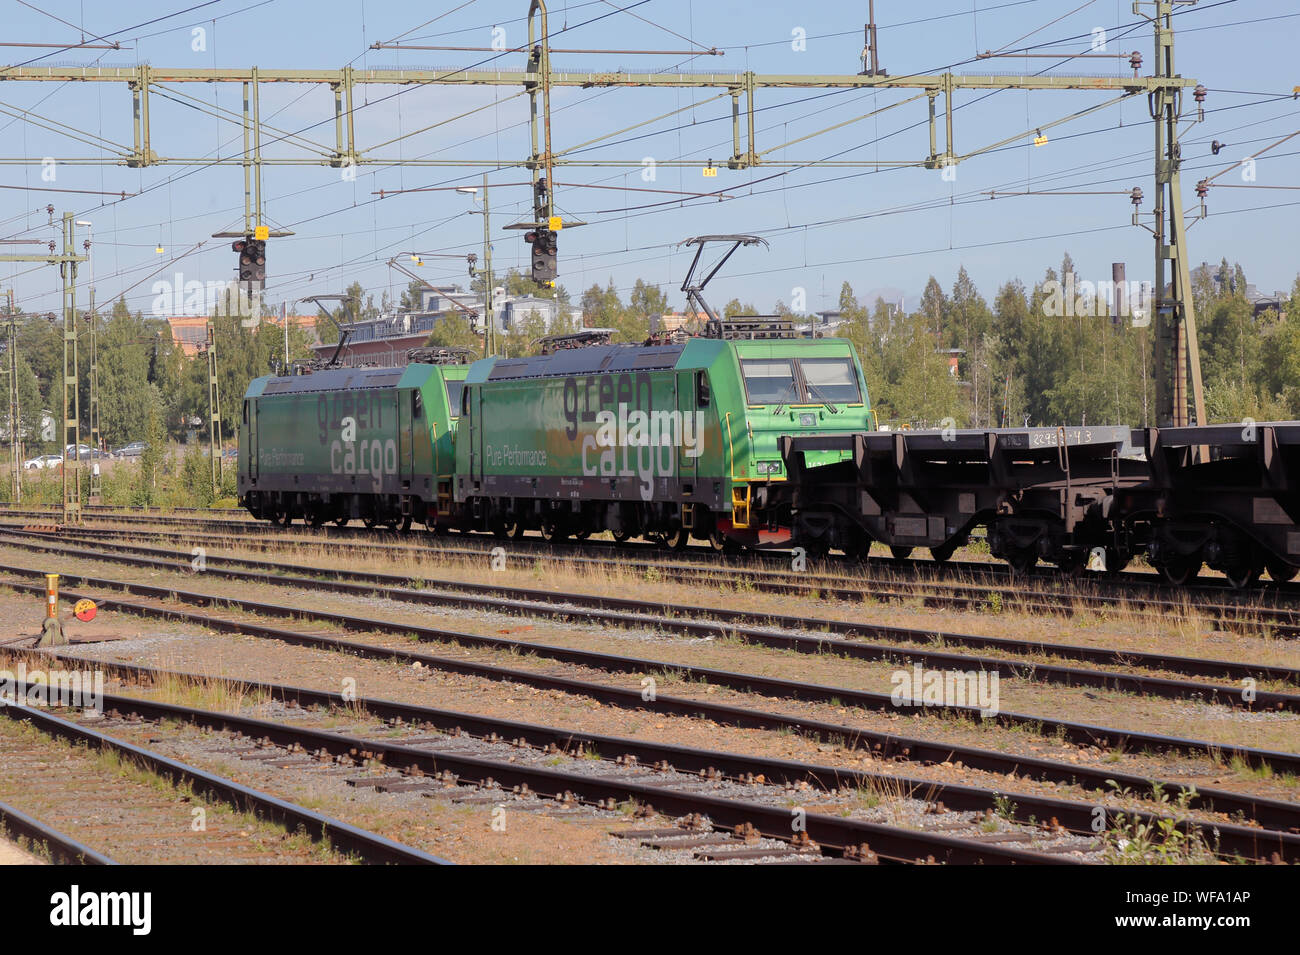 Lulea, Sweden - August 20, 2019: Two Green Cargo electric locomitives class Re pulling flat wagons loaded with steel from the nearby SSAB steel mill. Stock Photo